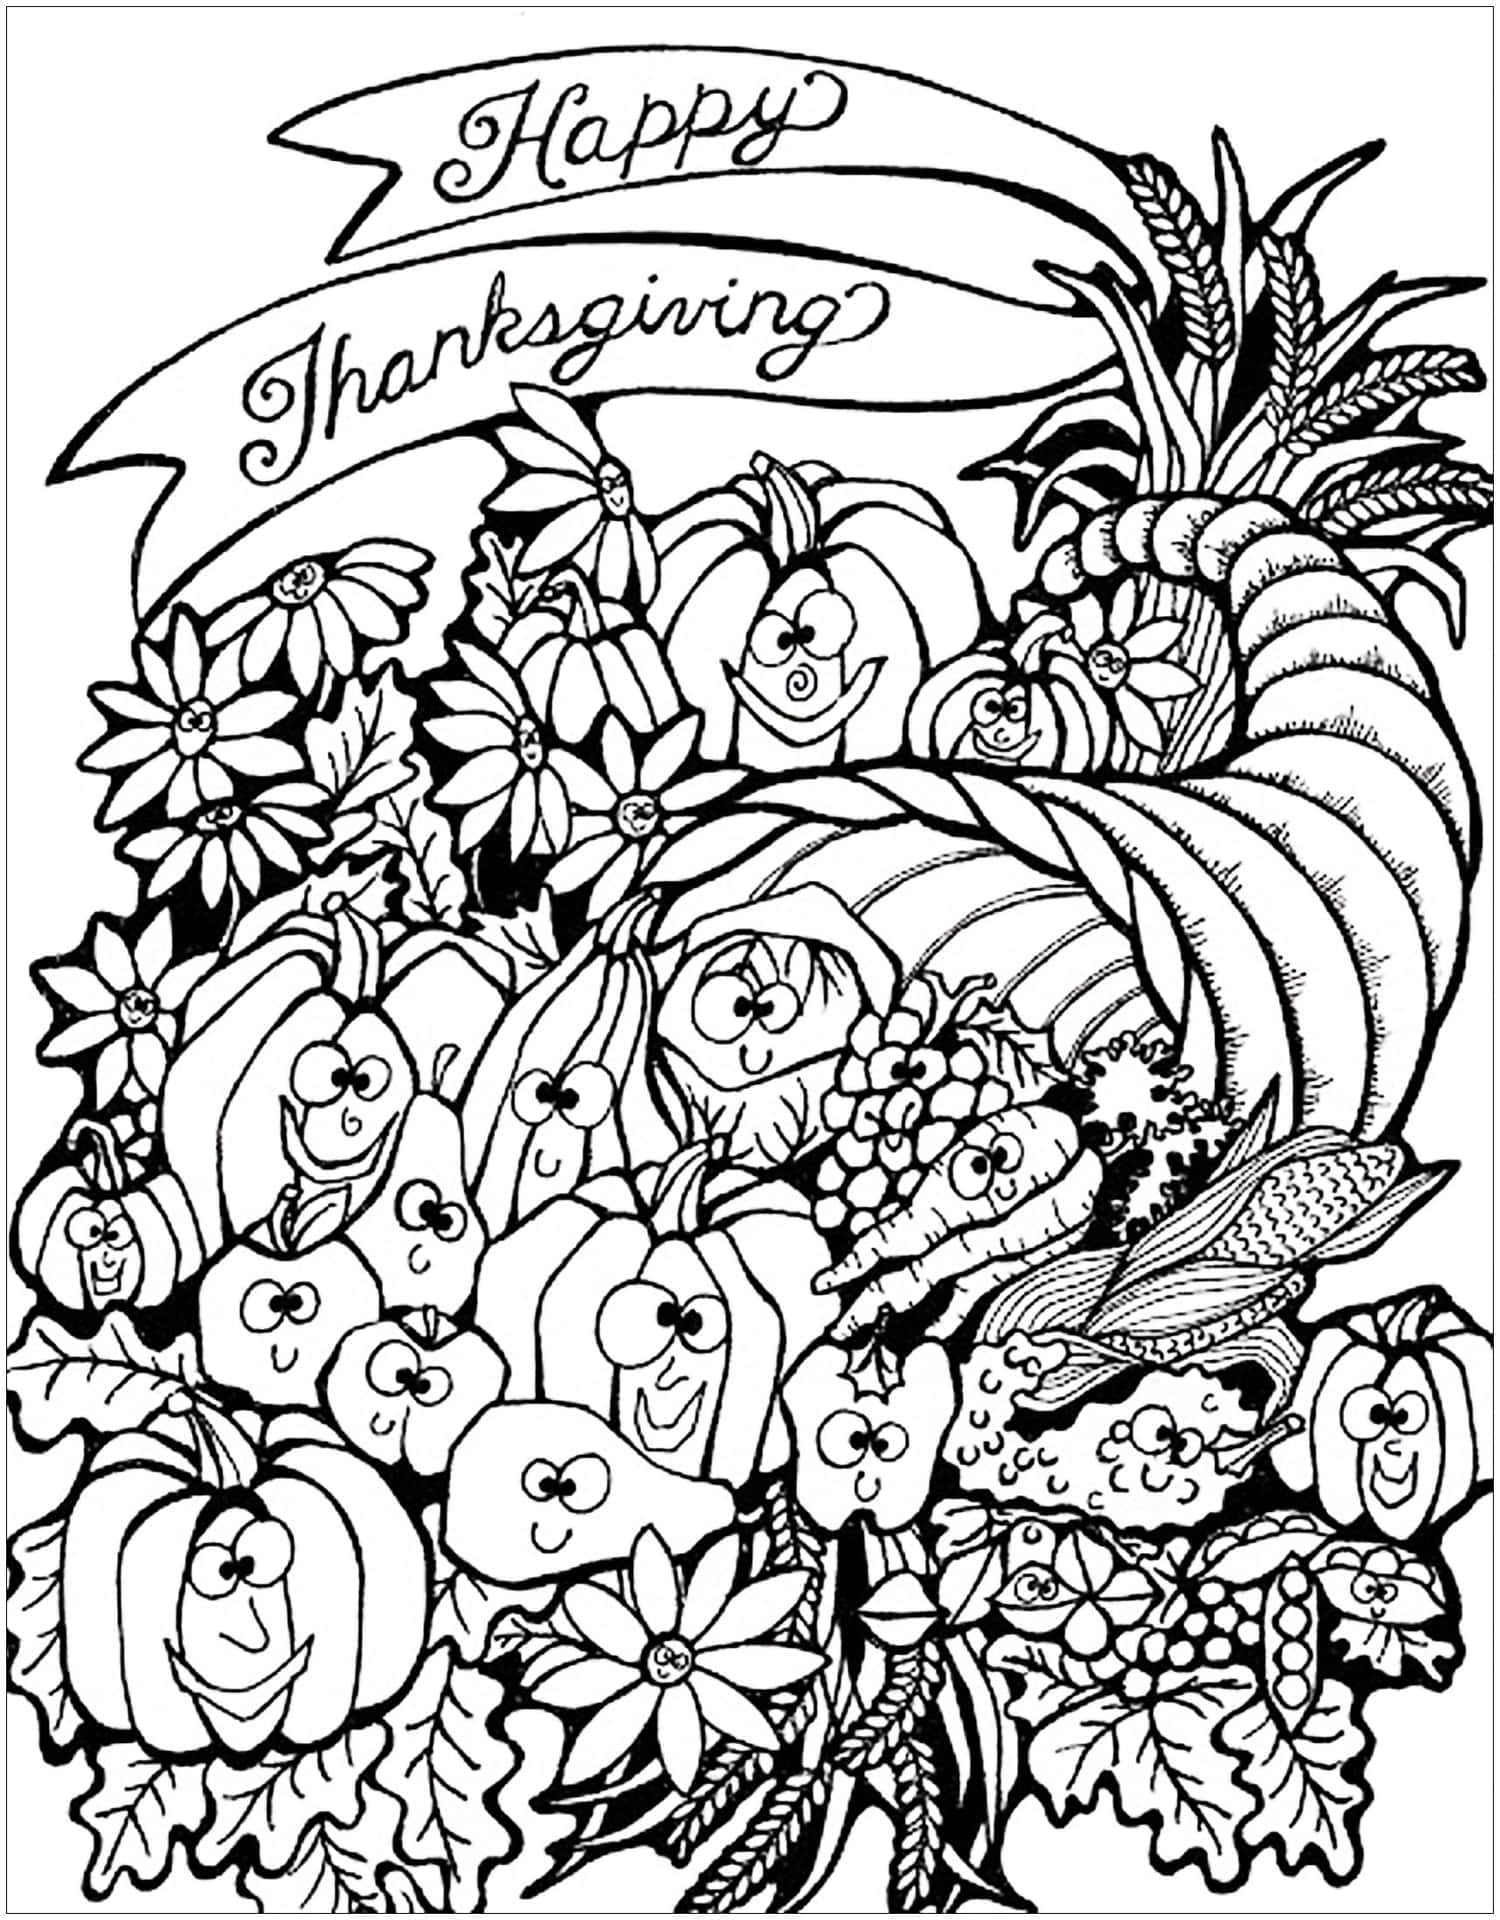 Spread the Joy of Thanksgiving with Coloring